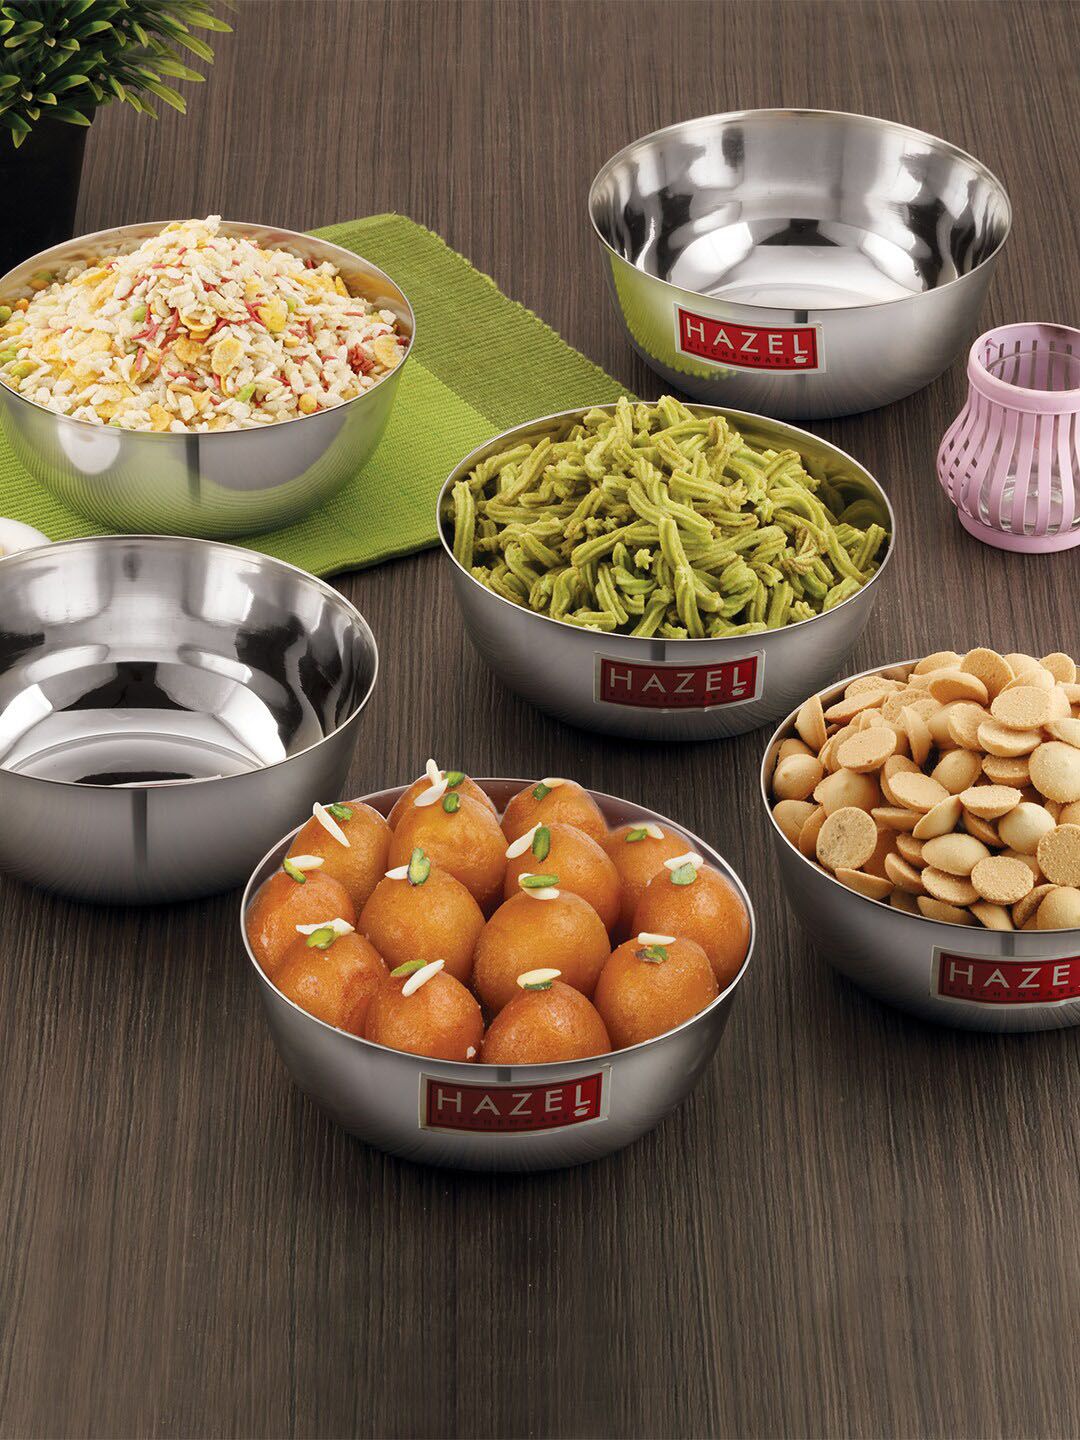 HAZEL Set Of 6 Silver-Toned Solid Stainless Steel Serving Bowl Price in India